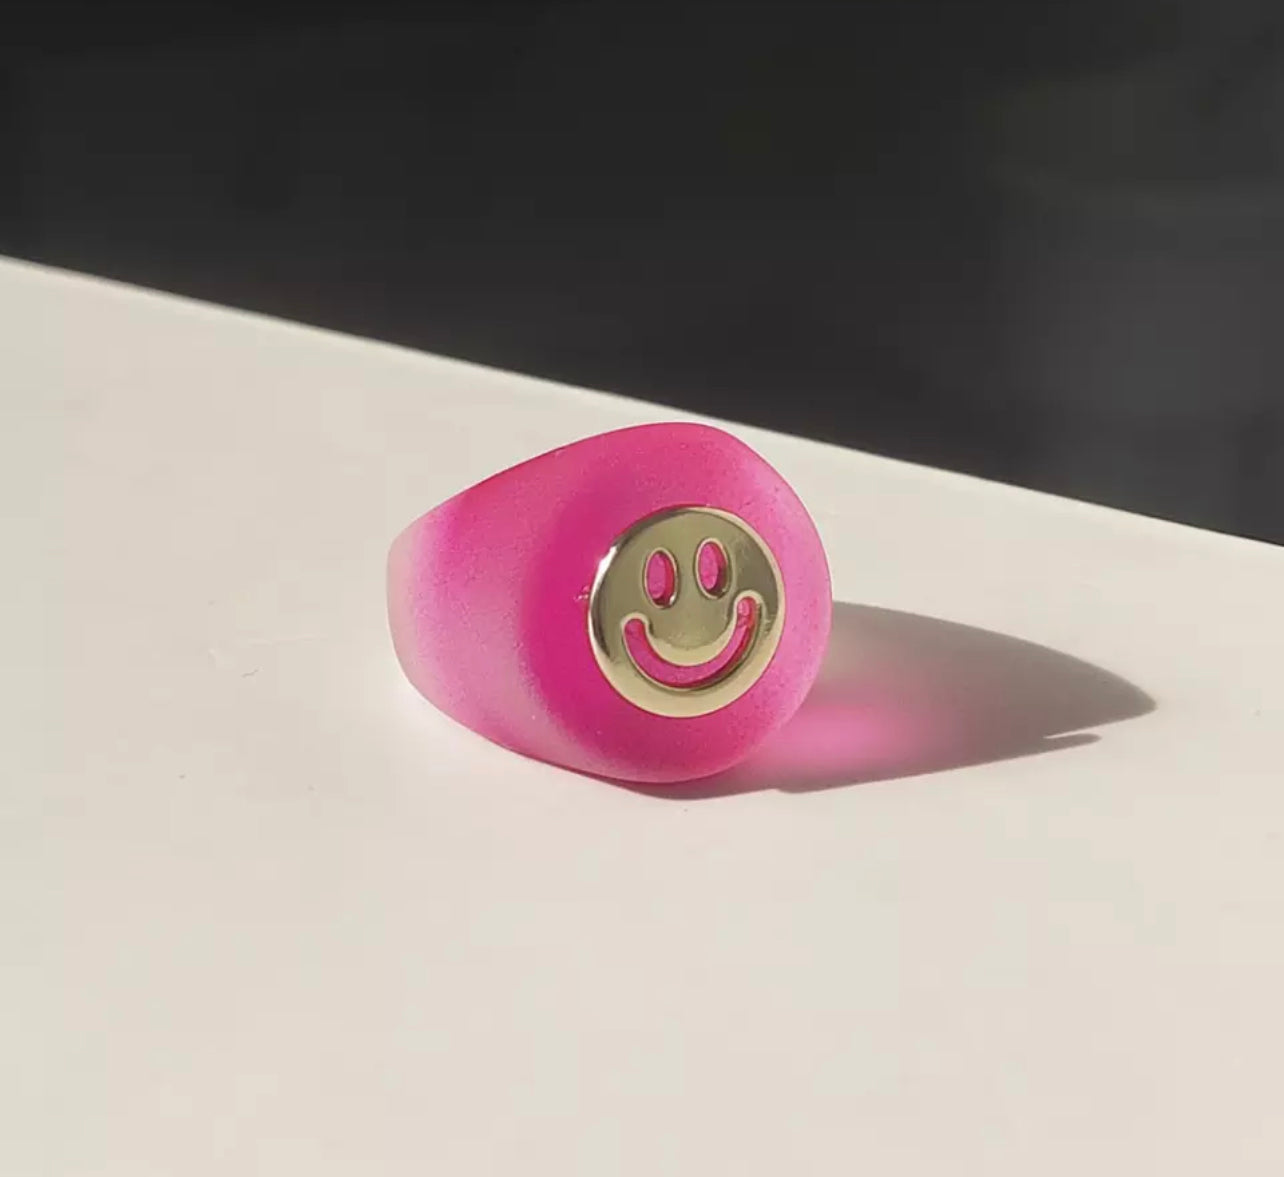 SMILEY RING